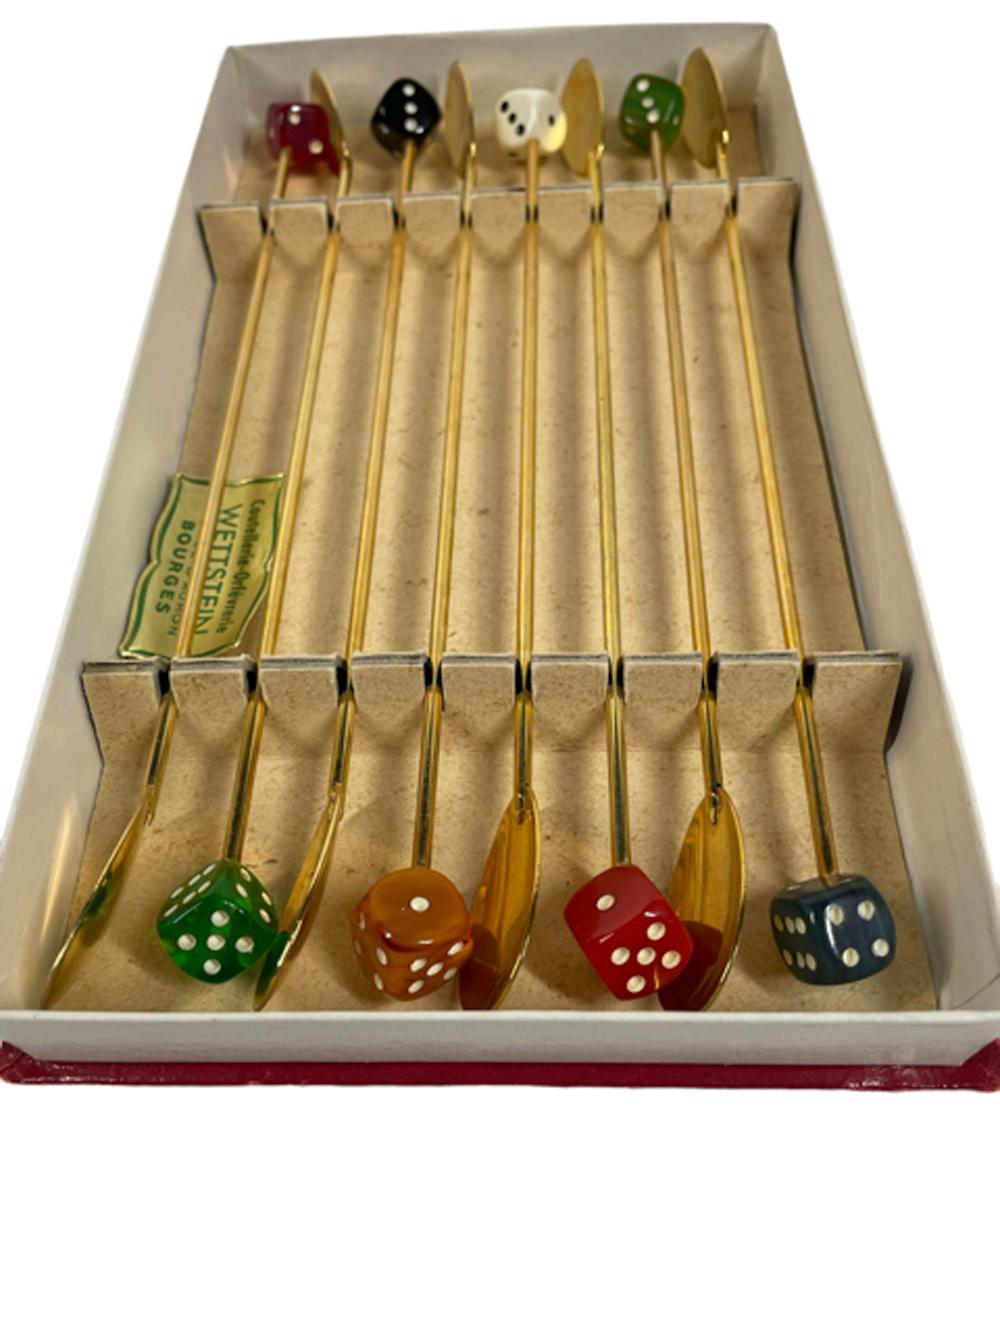 Mid-Century Modern Vintage Gold-Tone Drink Stir Spoons with 8 Different Color Bakelite Dice Ends